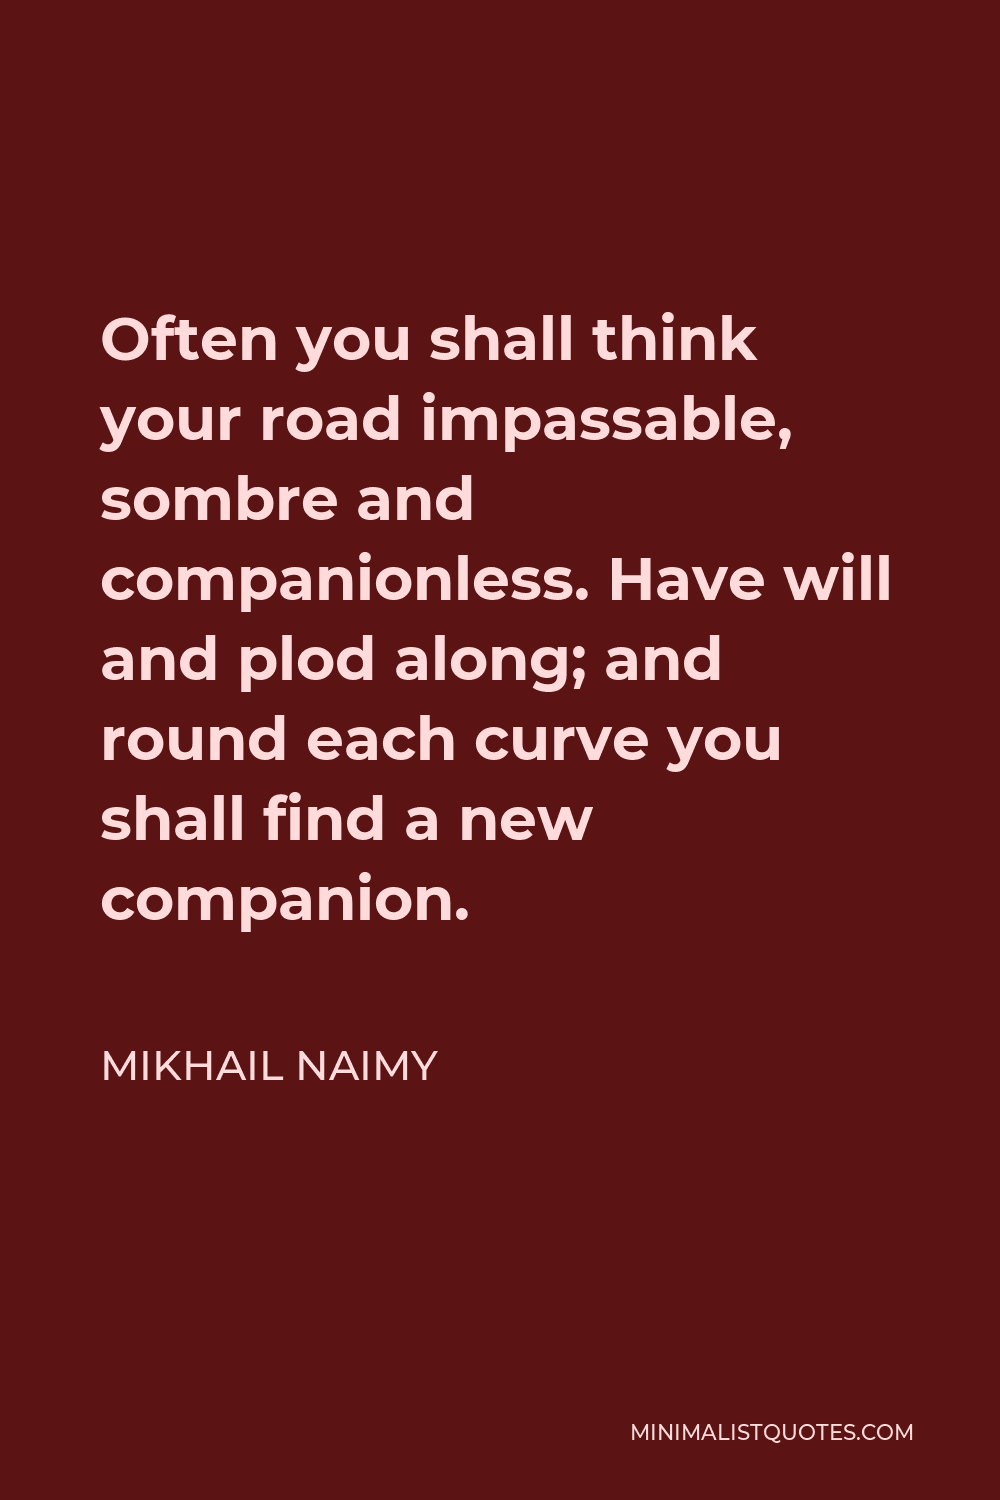 Mikhail Naimy Quote - Often you shall think your road impassable, sombre and companionless. Have will and plod along; and round each curve you shall find a new companion.